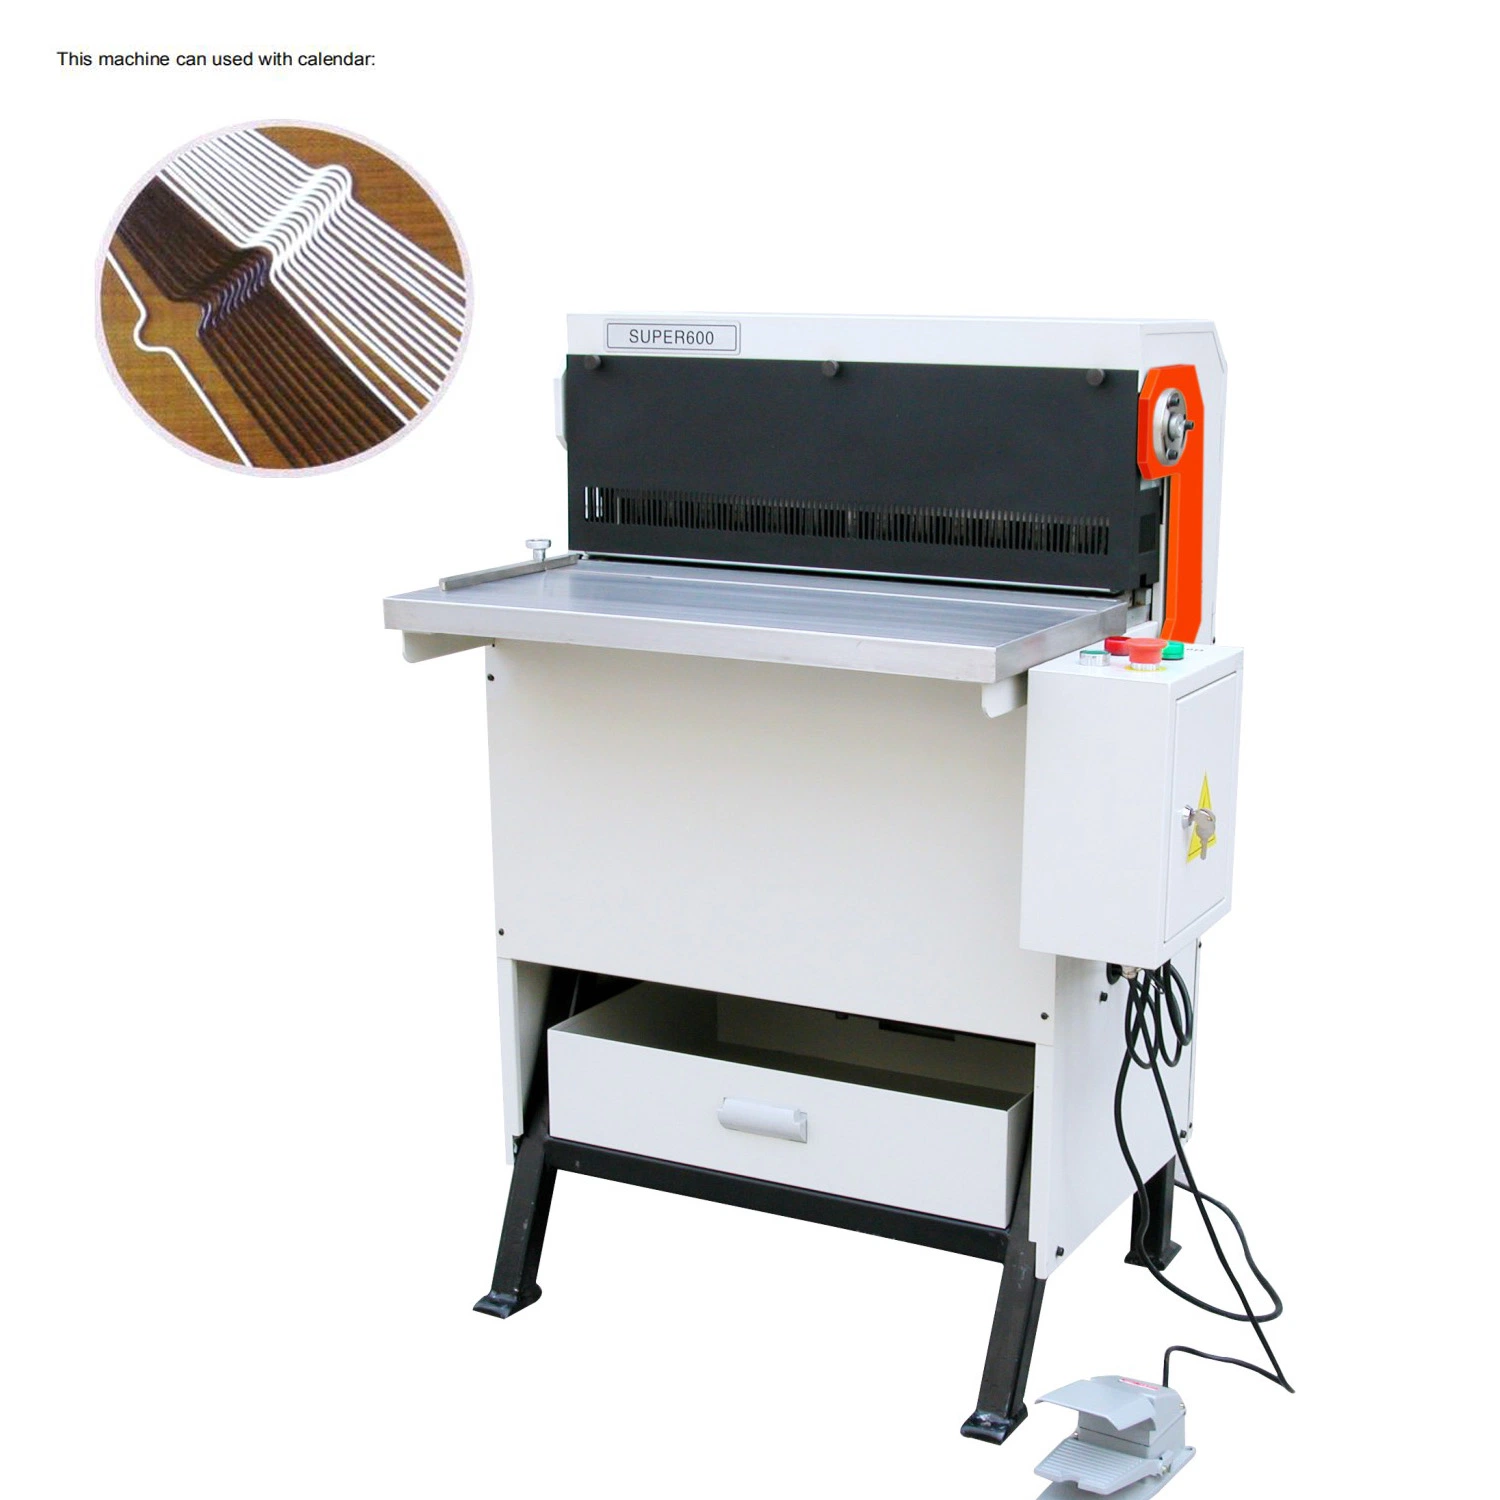 Factory Use Heavy Duty Paper Hole Punching / Puncher Machine Super 600